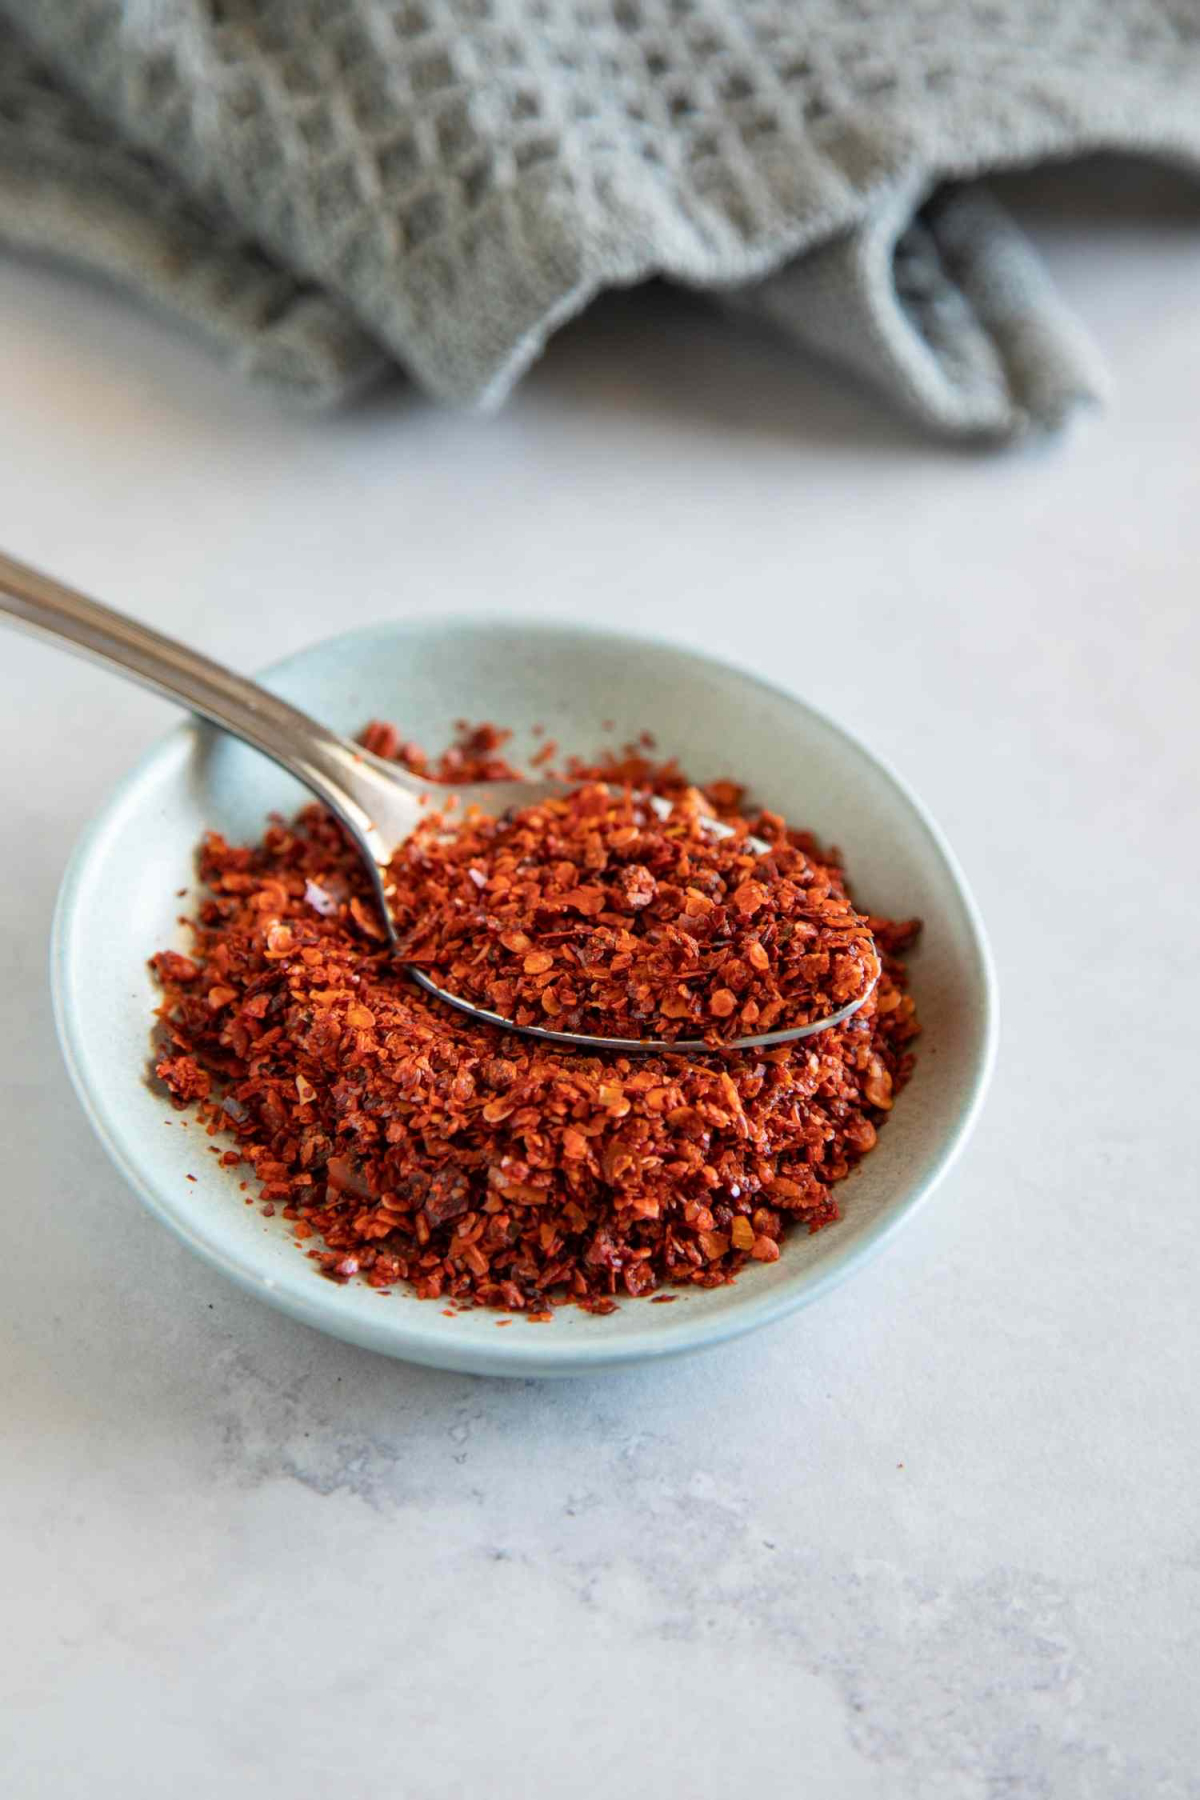 what are the most common spices used in cooking